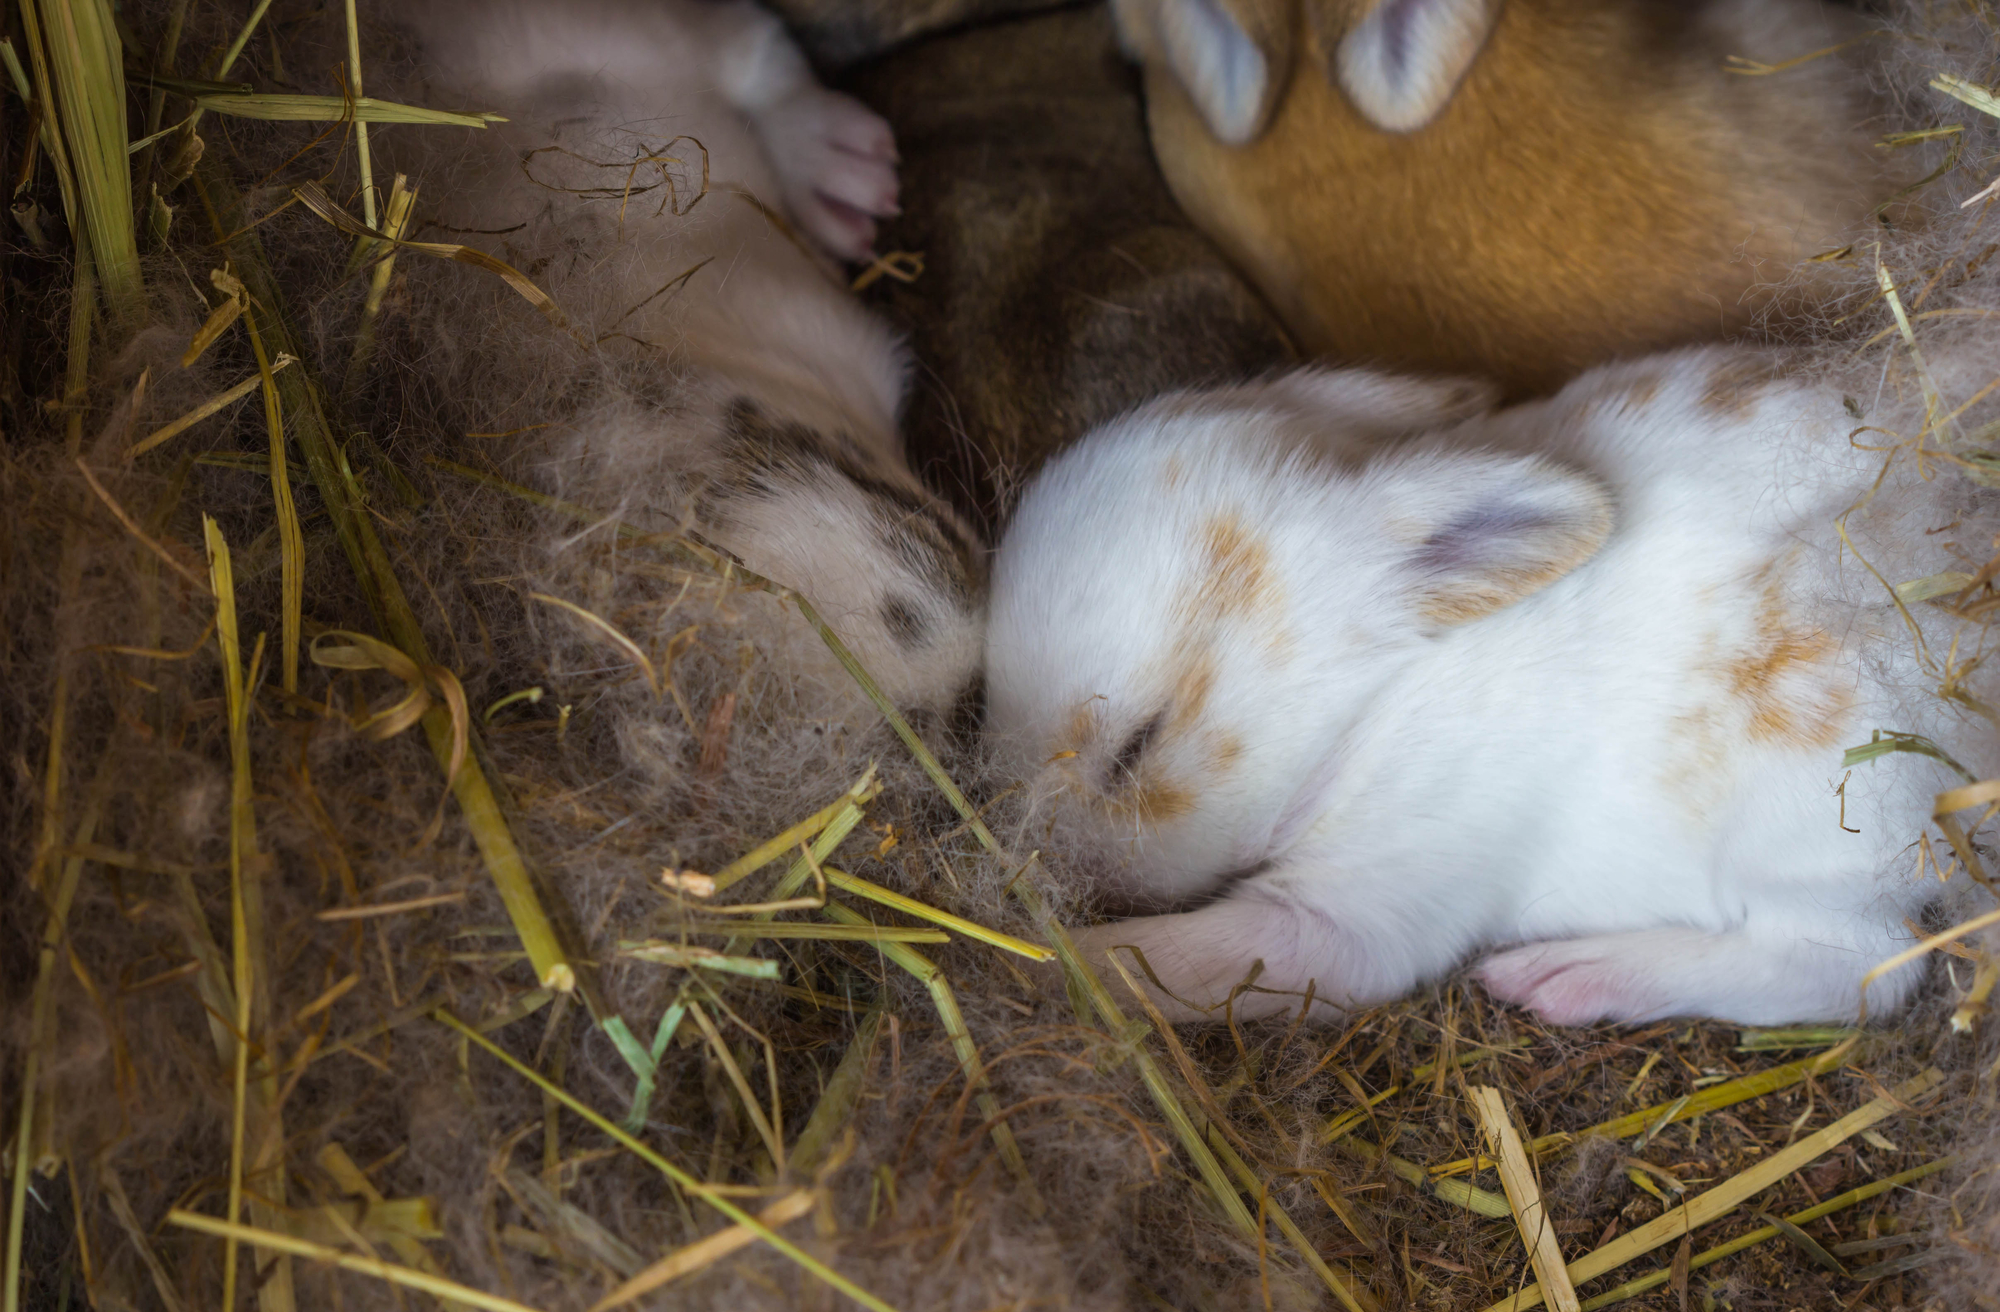 When Can Baby Bunnies Leave Their Mothers?